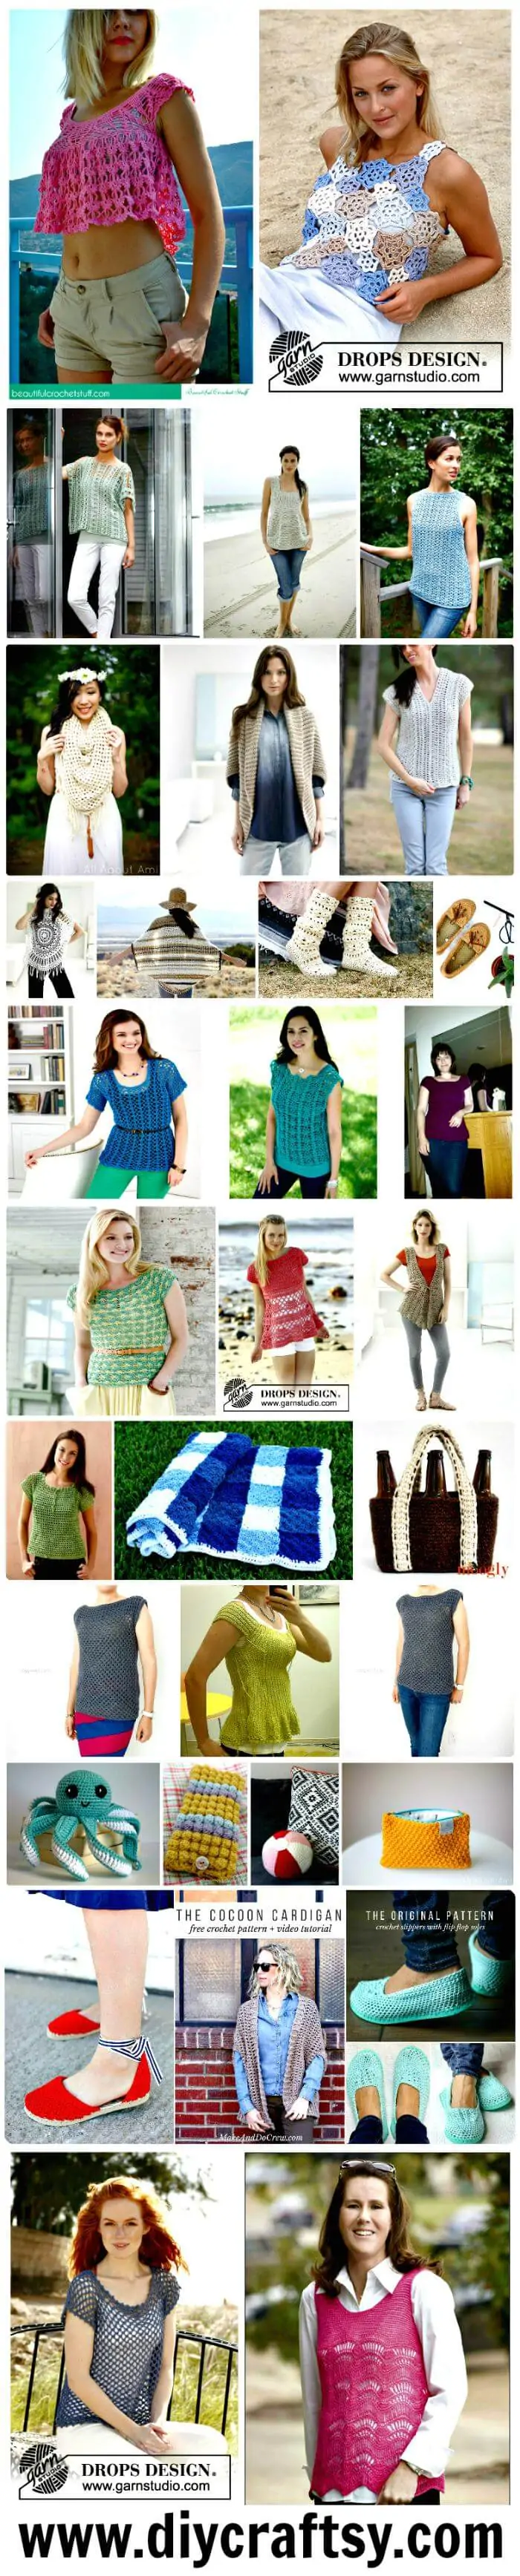 110-Free-Crochet-Patterns-for-Summer-and-Spring